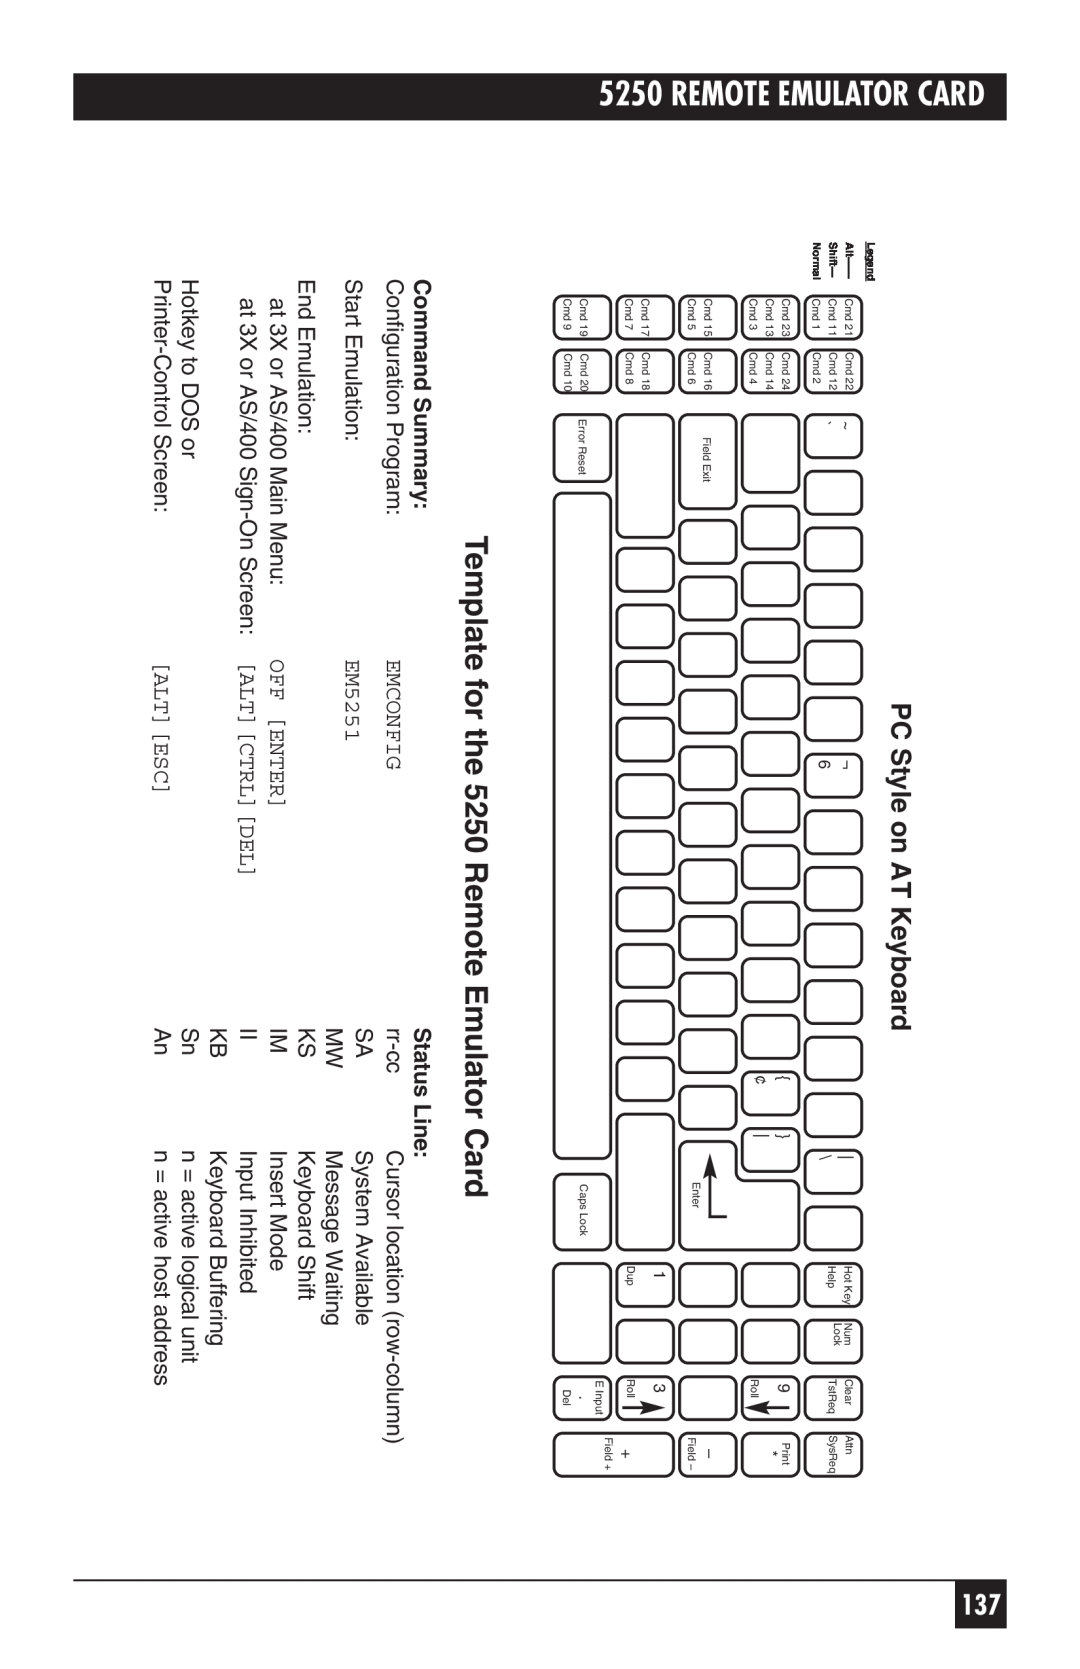 Black Box Template for the 5250 Remote Emulator Card, PC Style ATonKeyboardAT Keyboard, Command Summary, Status Line 